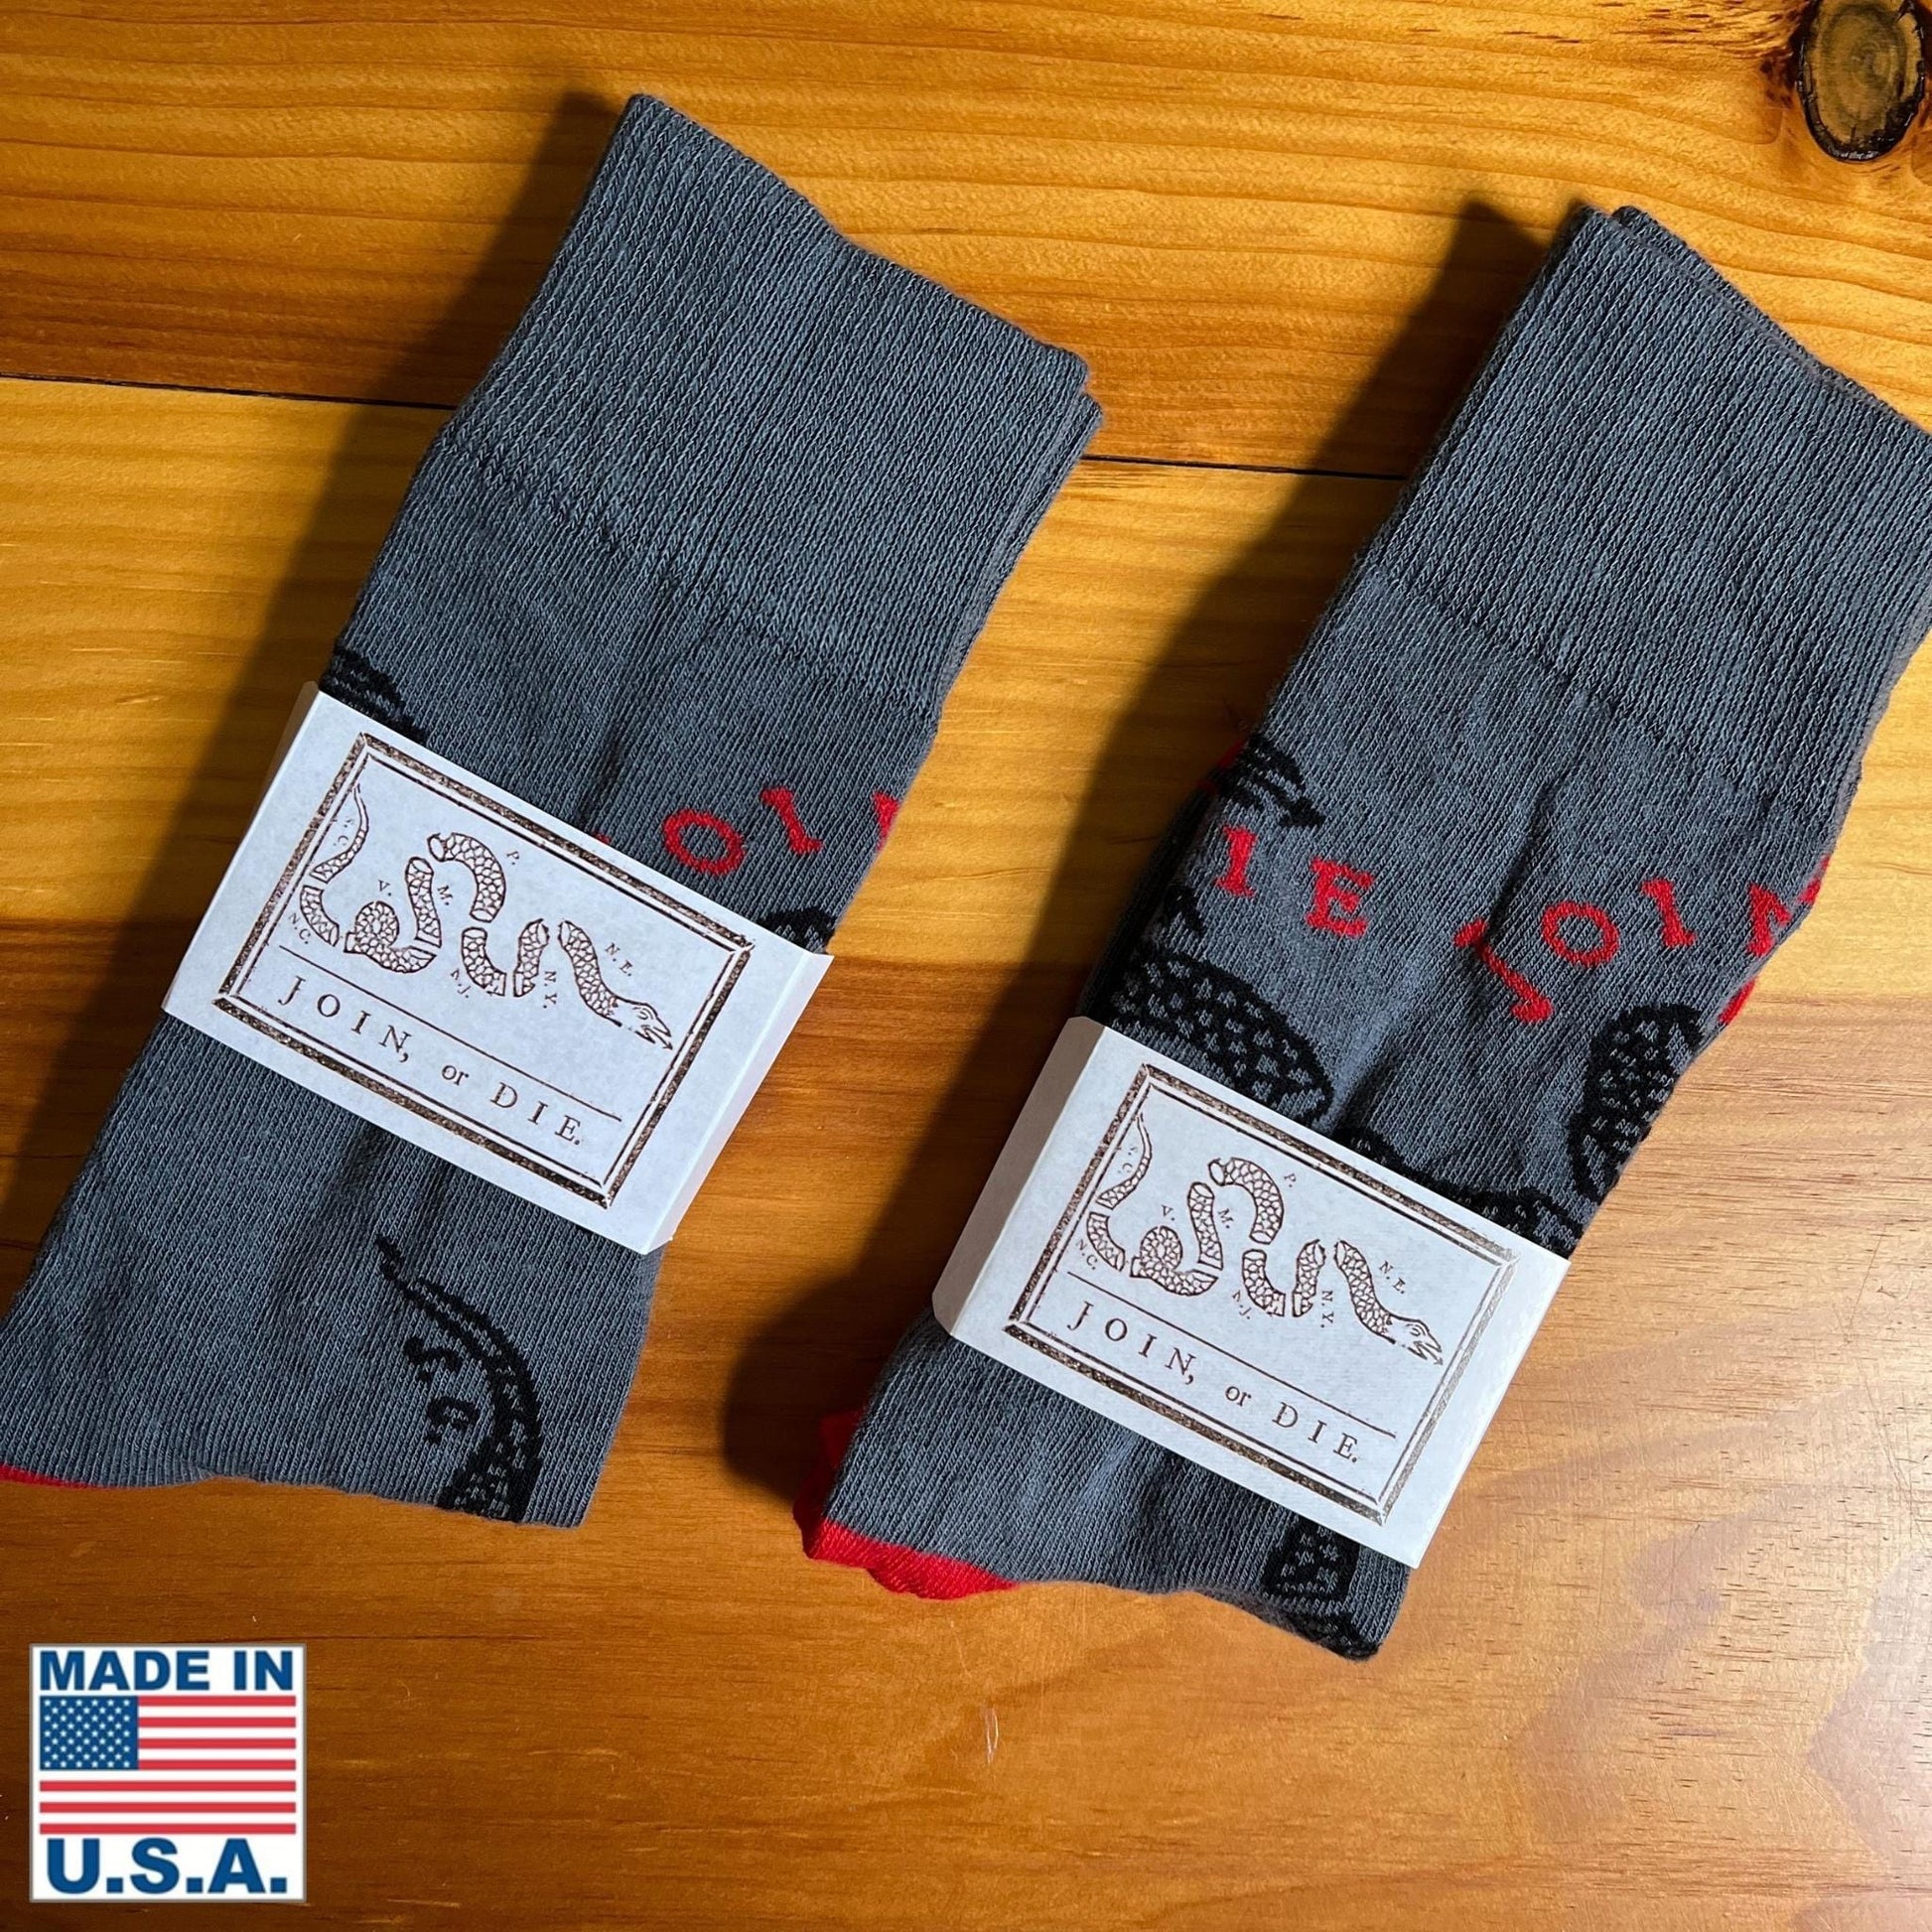 "Join or Die" Socks — Made in USA from The HIstory List store in their sockbands